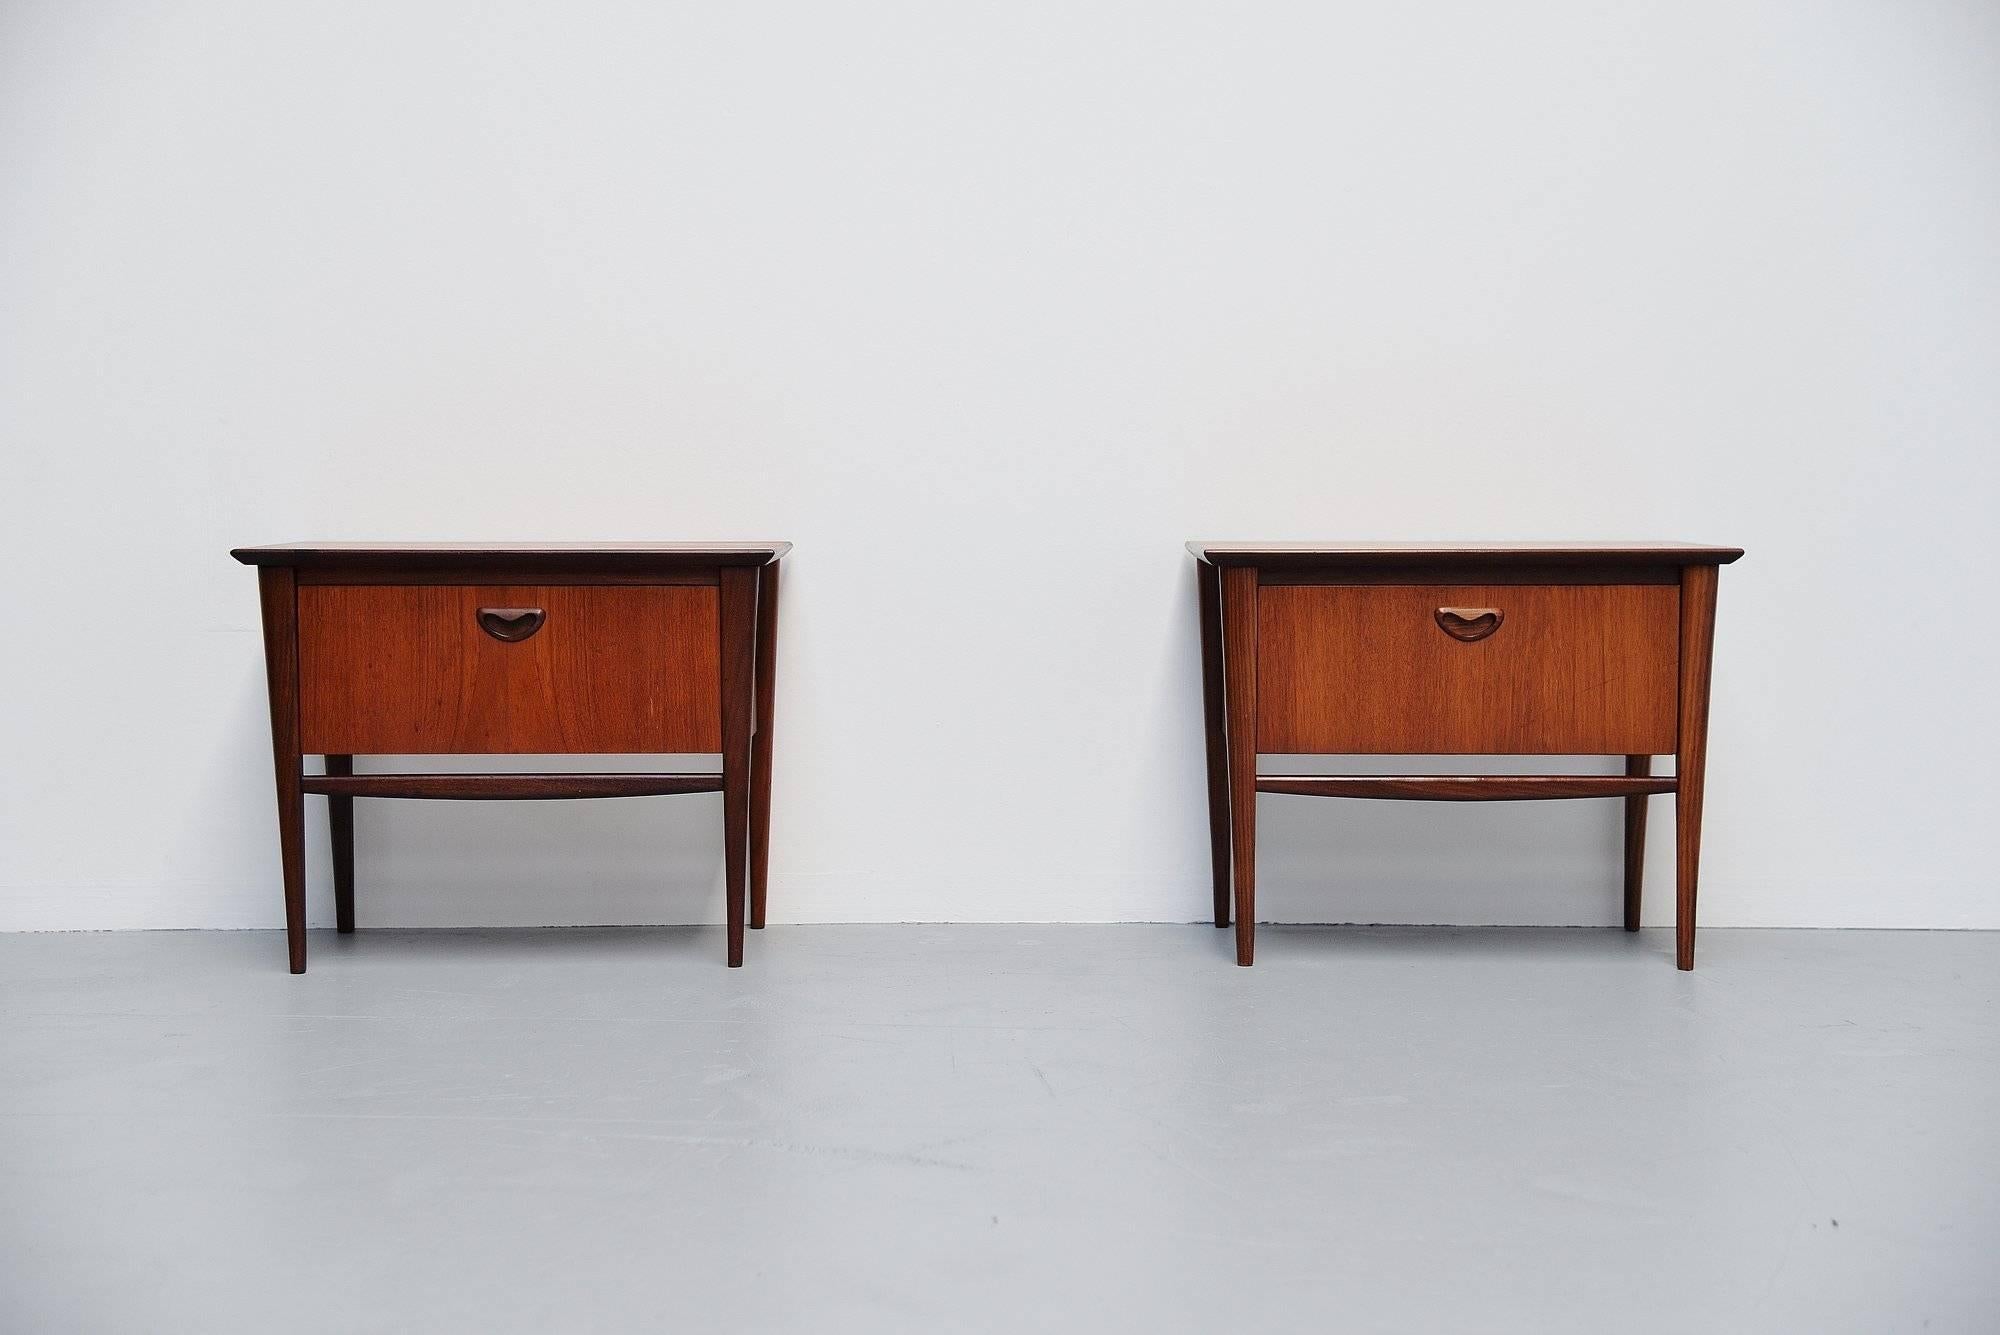 Very nice pair of night cabinets designed by Louis Van Teeffelen for Webe Meubelen, Holland, 1960. These teak night stands are very nice organic shaped. Webe was one of the better furniture makers from Holland and they inspired their furniture on